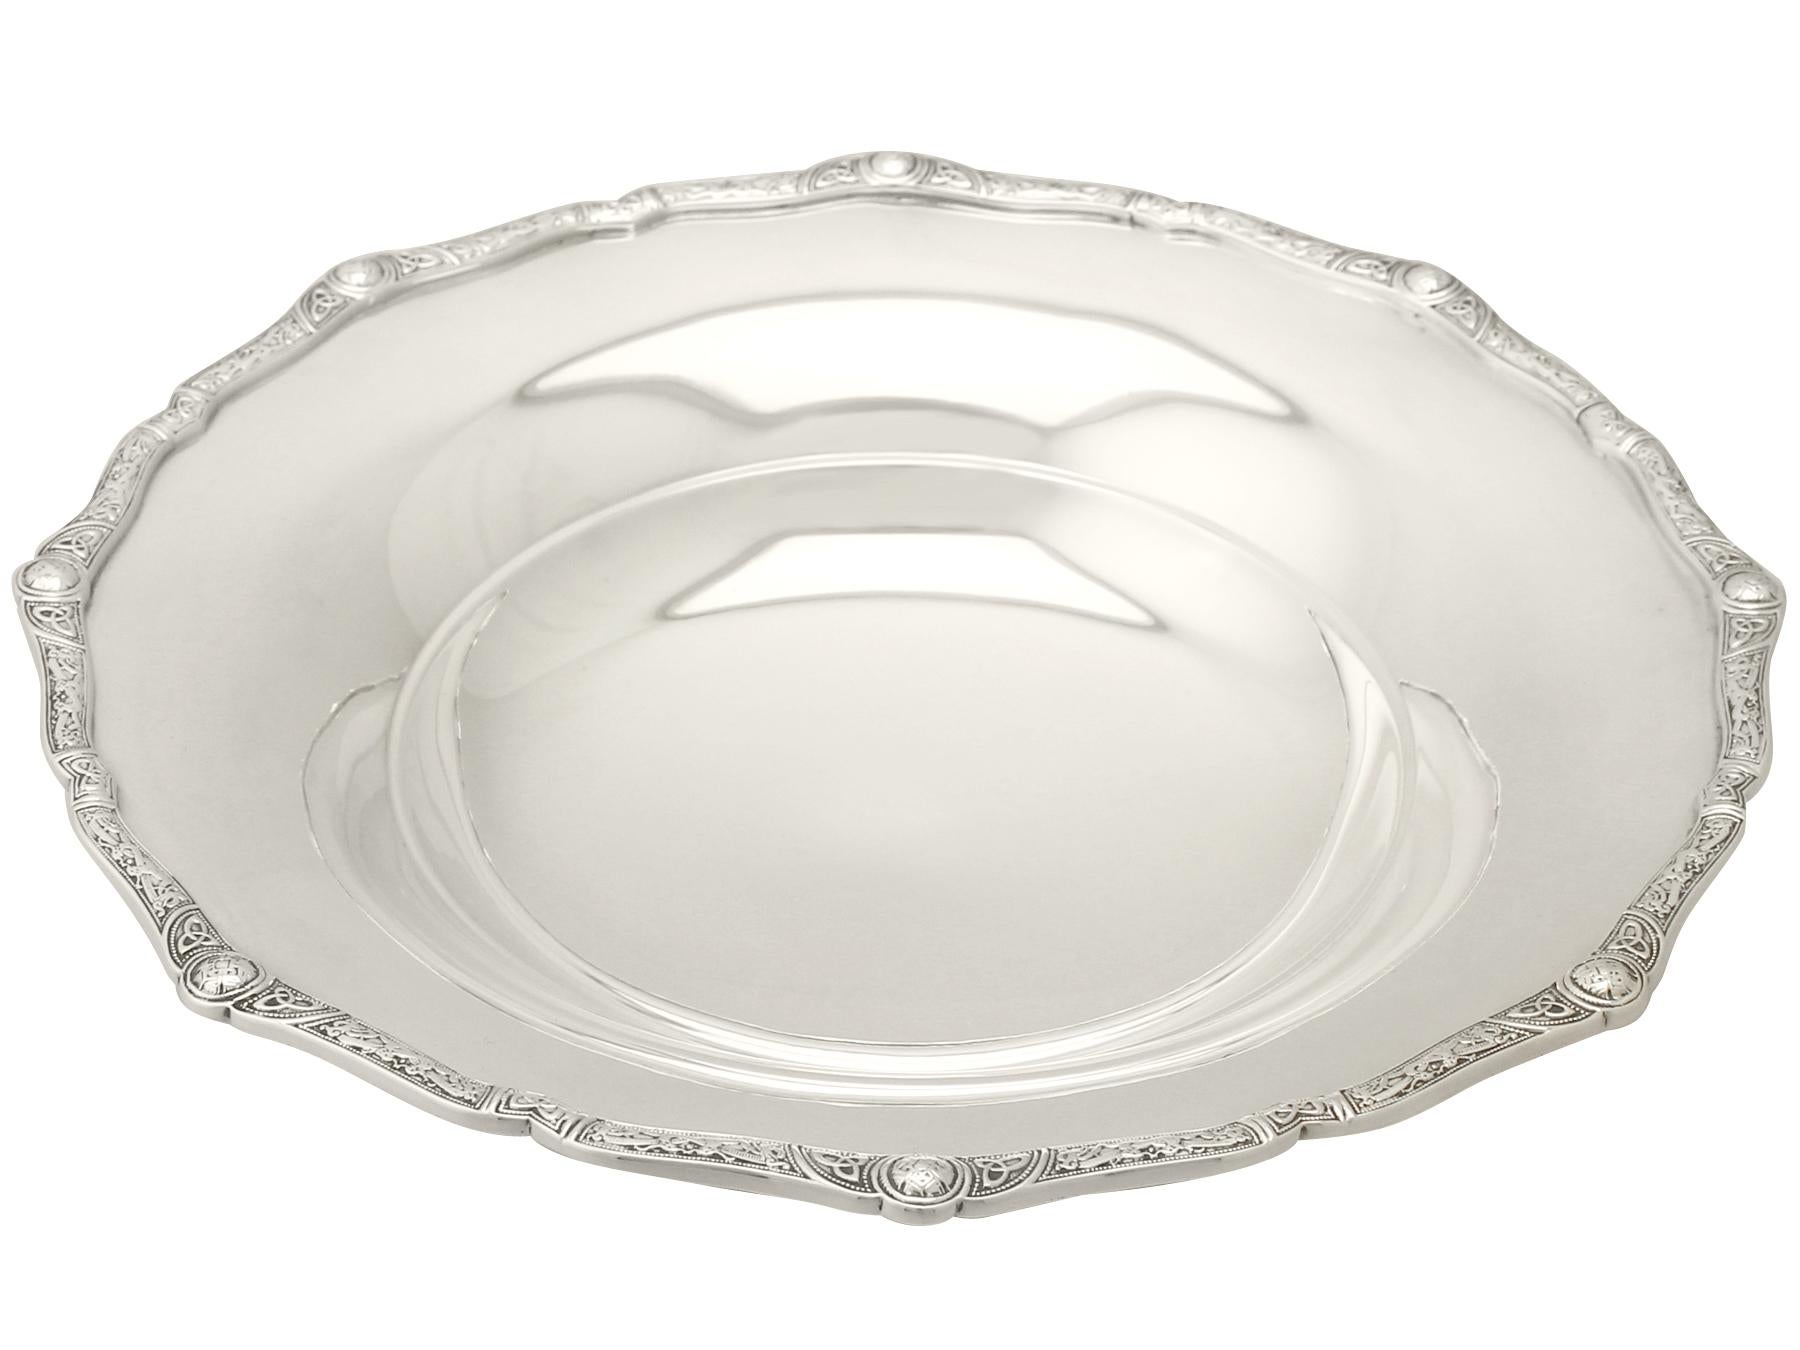 An exceptional, Fine and impressive antique George V English sterling silver dish or tazza in the Lindisfarne style; an addition to our ornamental silverware collection.

This exceptional antique George V sterling silver dish or tazza has a